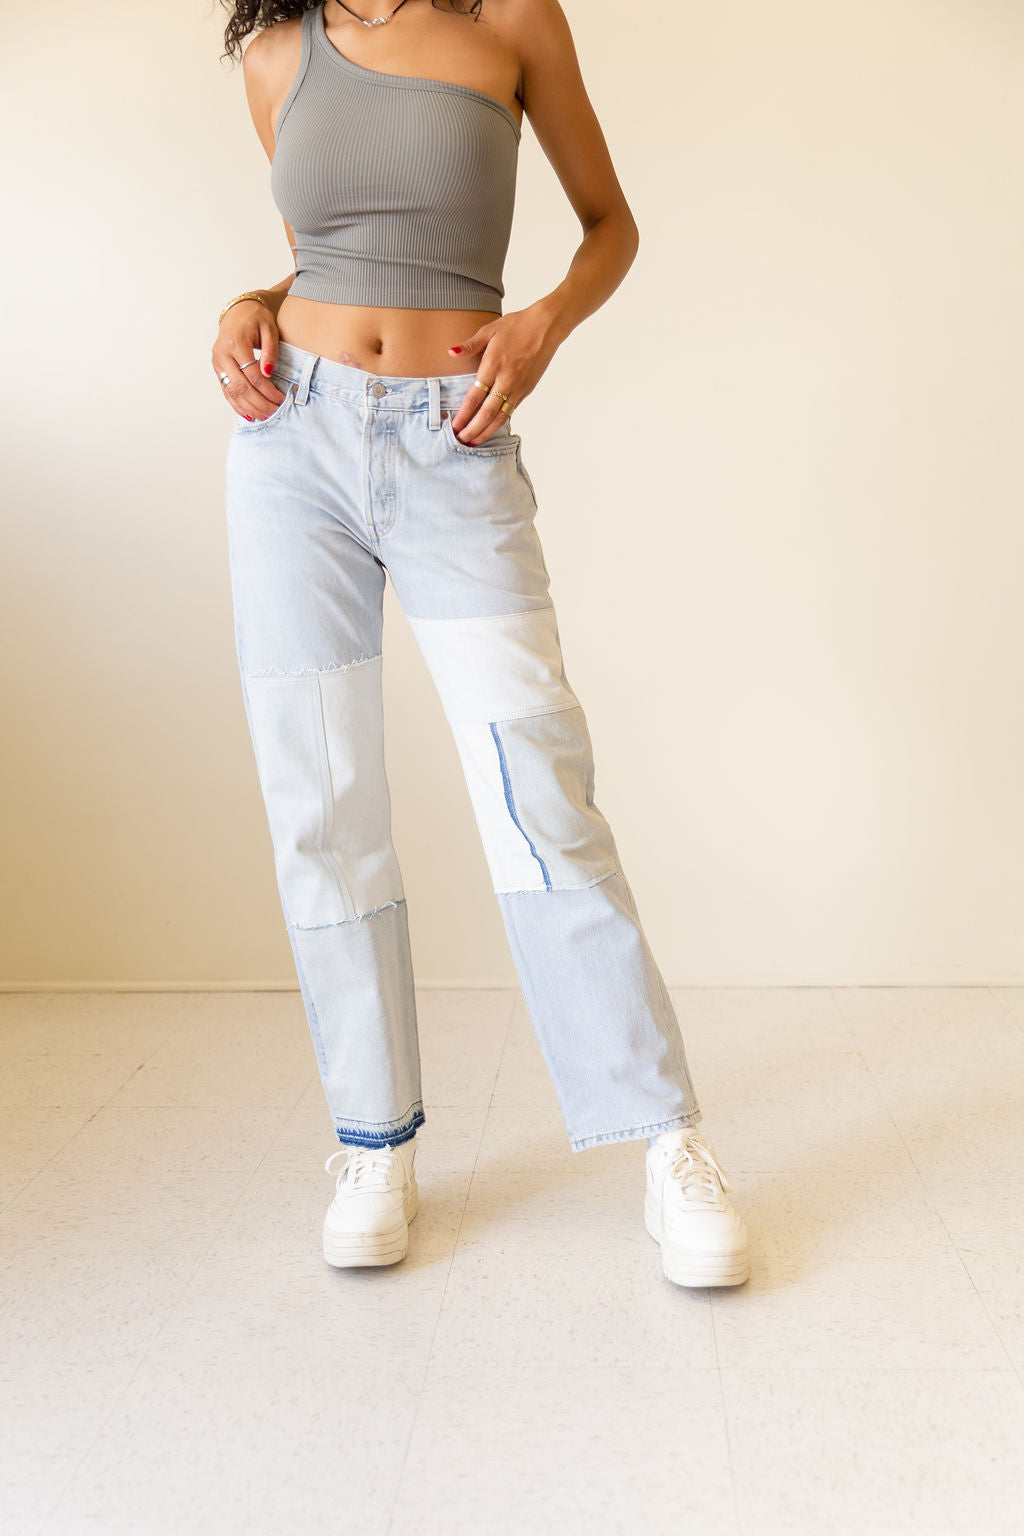 501 90s Freehand Panaled Jeans by Levi's